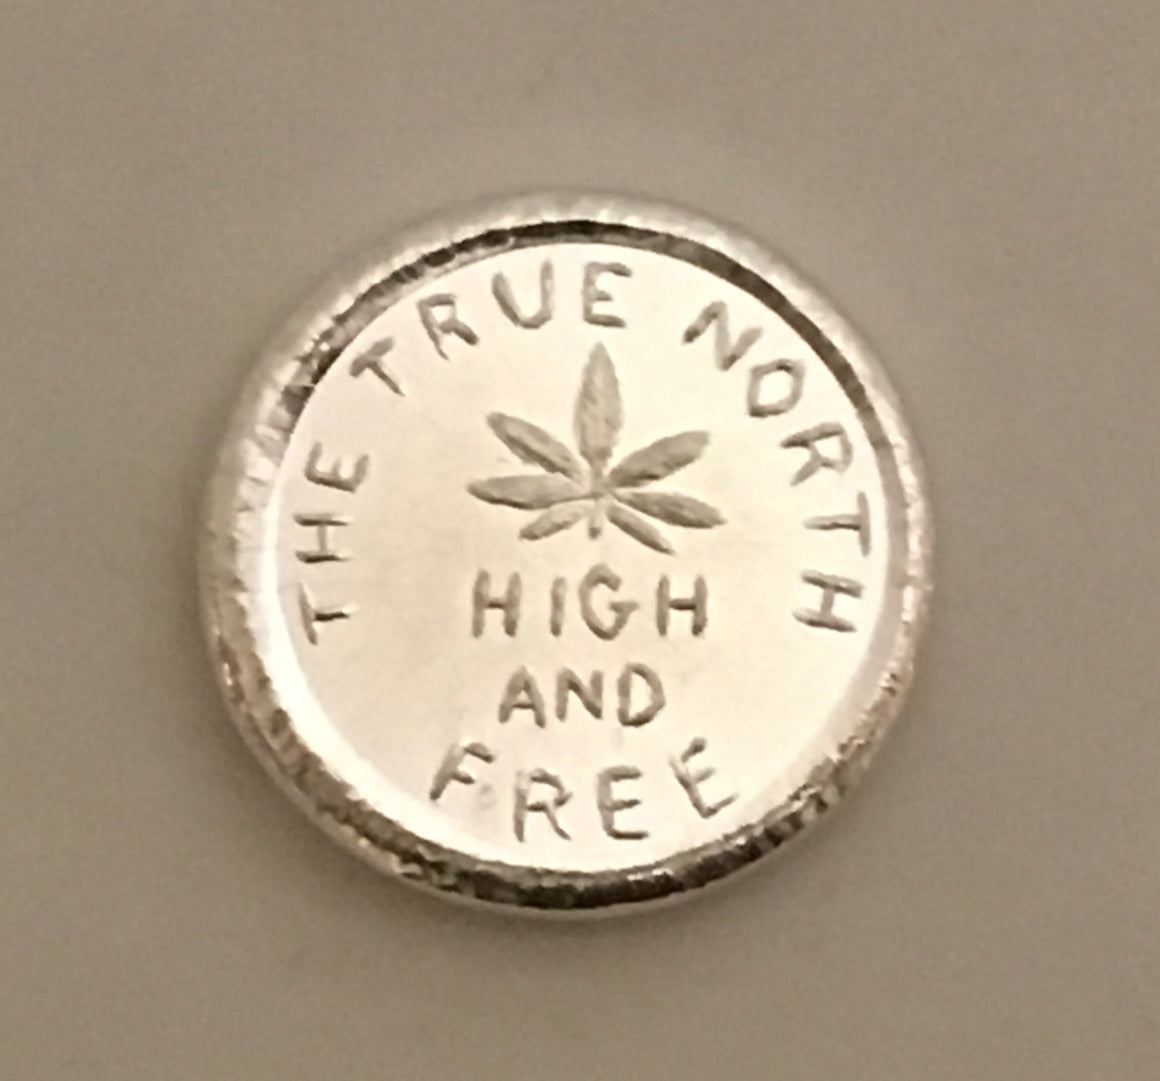 The True North High and Free round by Beaver Bullion 1oz Hand Poured .999 Silver